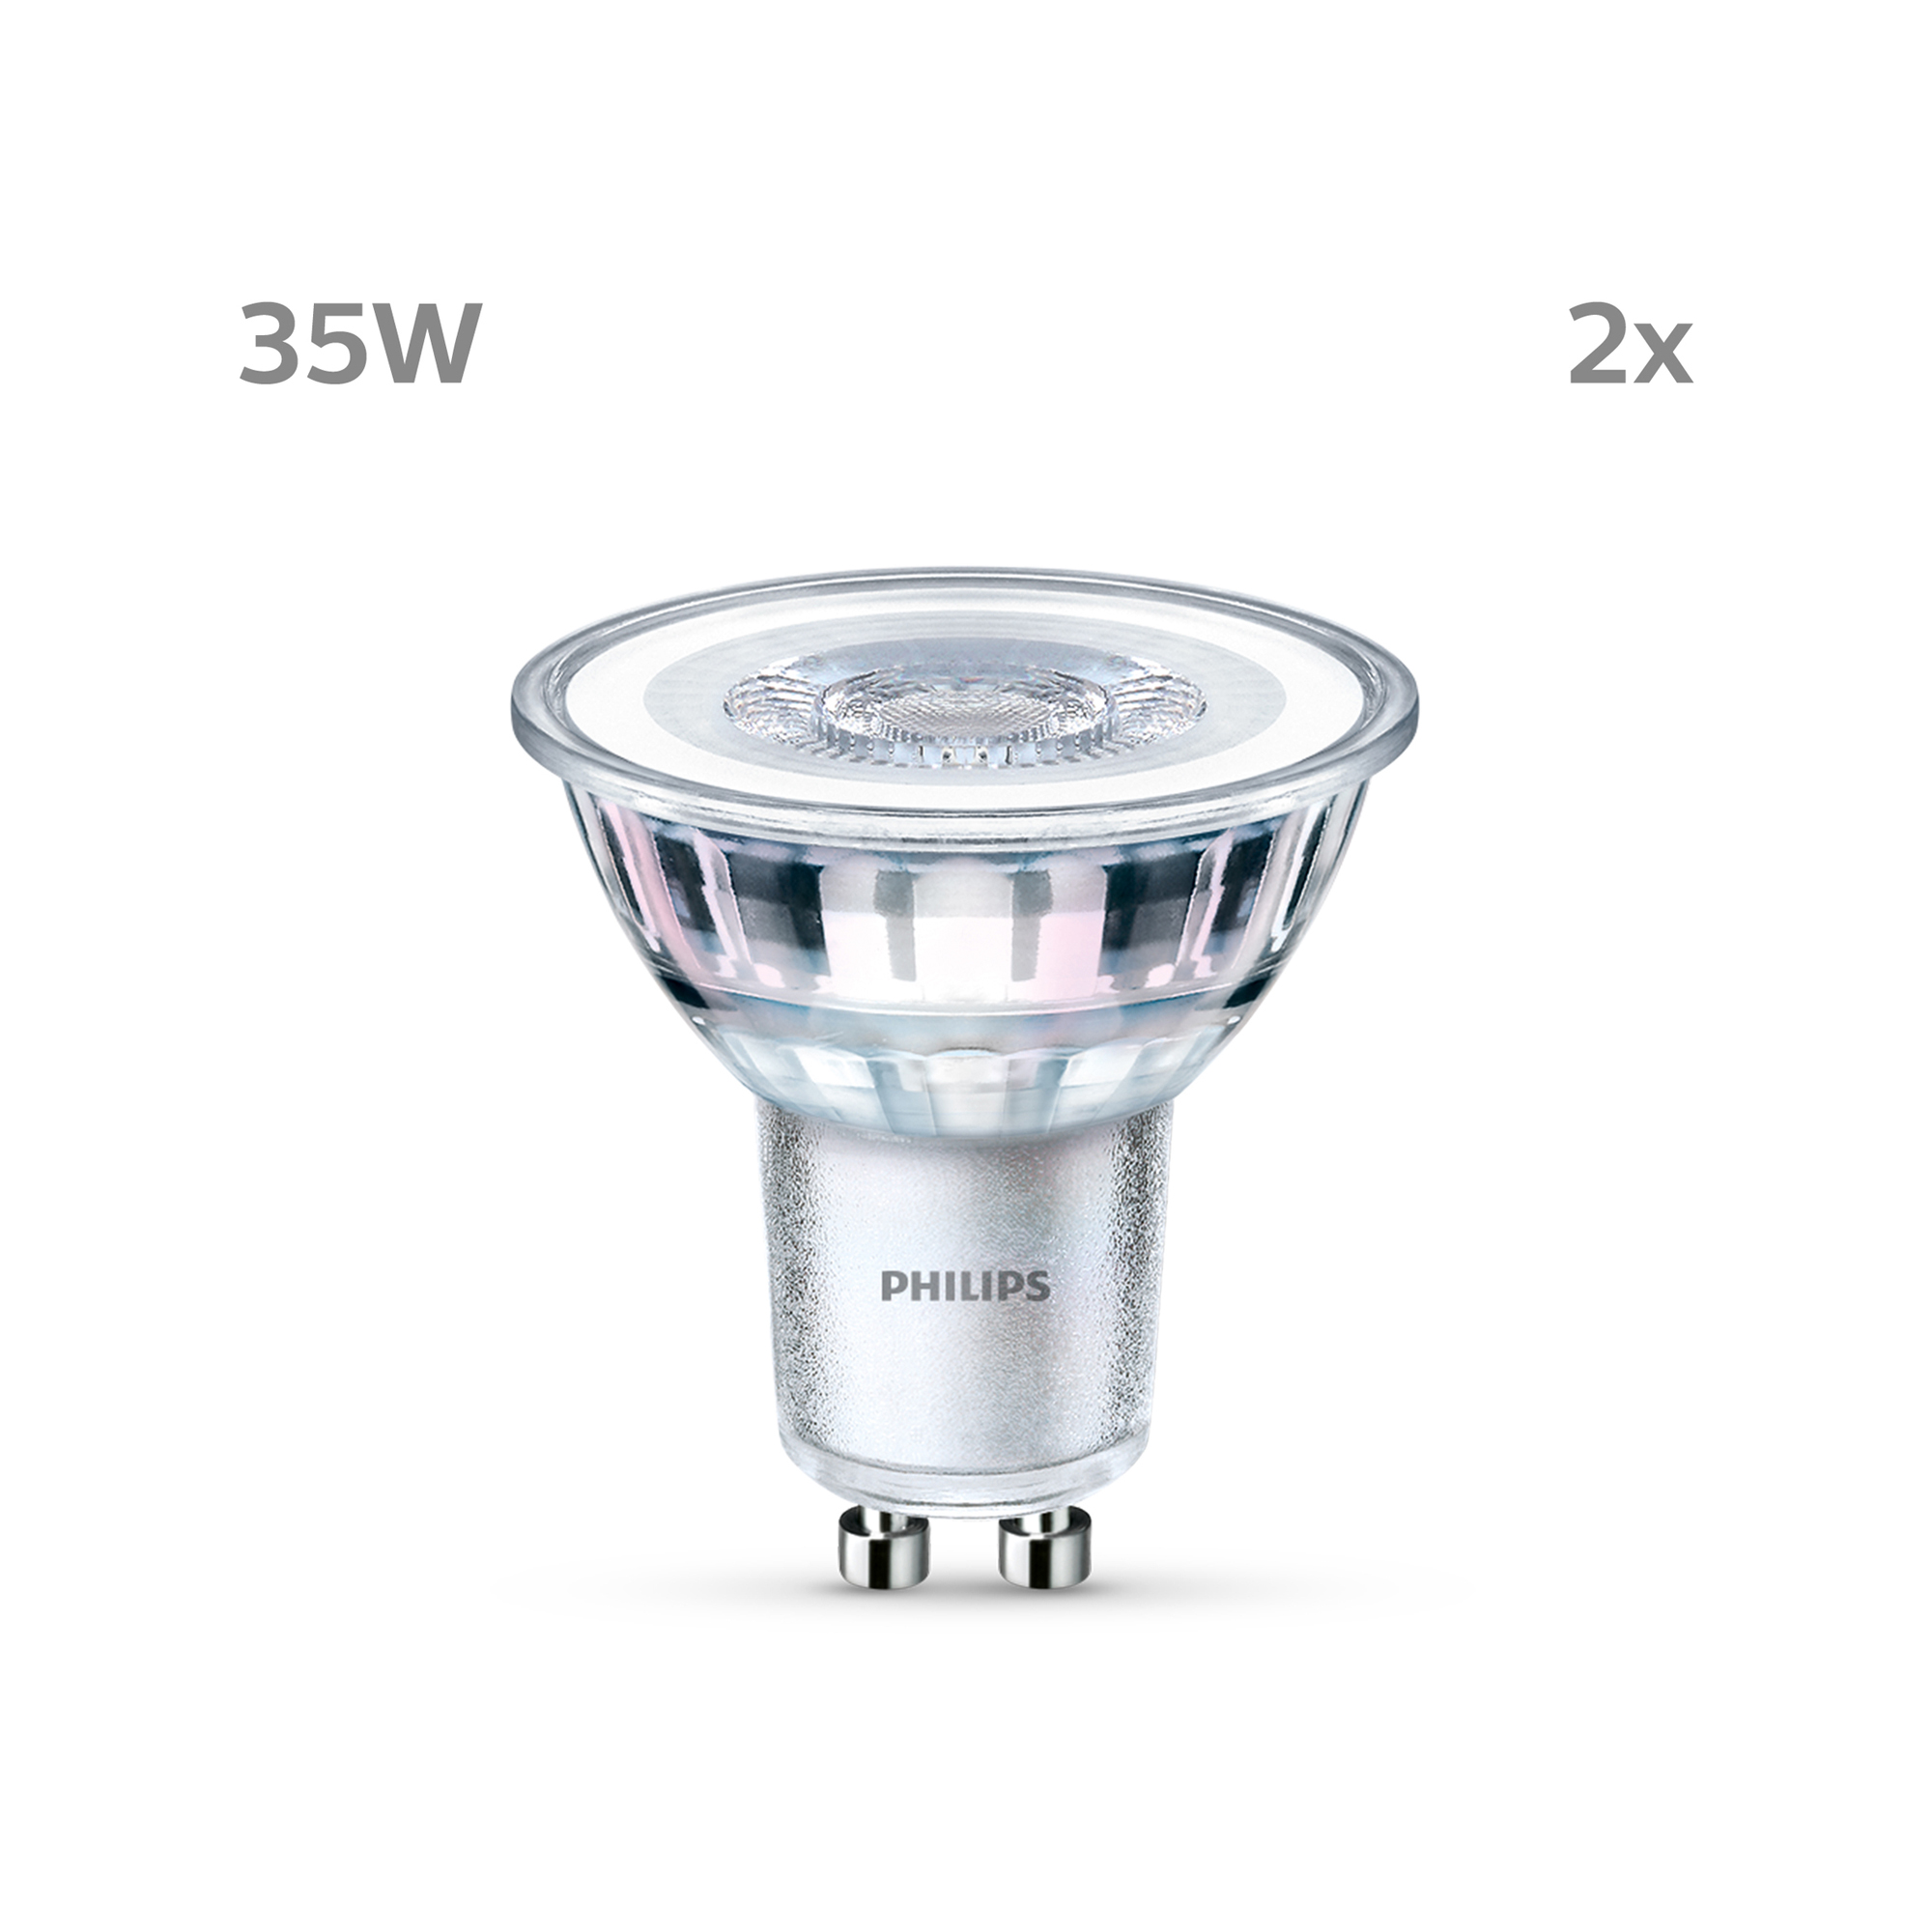 Philips LED Spot Double Pack 3.5-35W GU10 827 36° 255lm 2700K